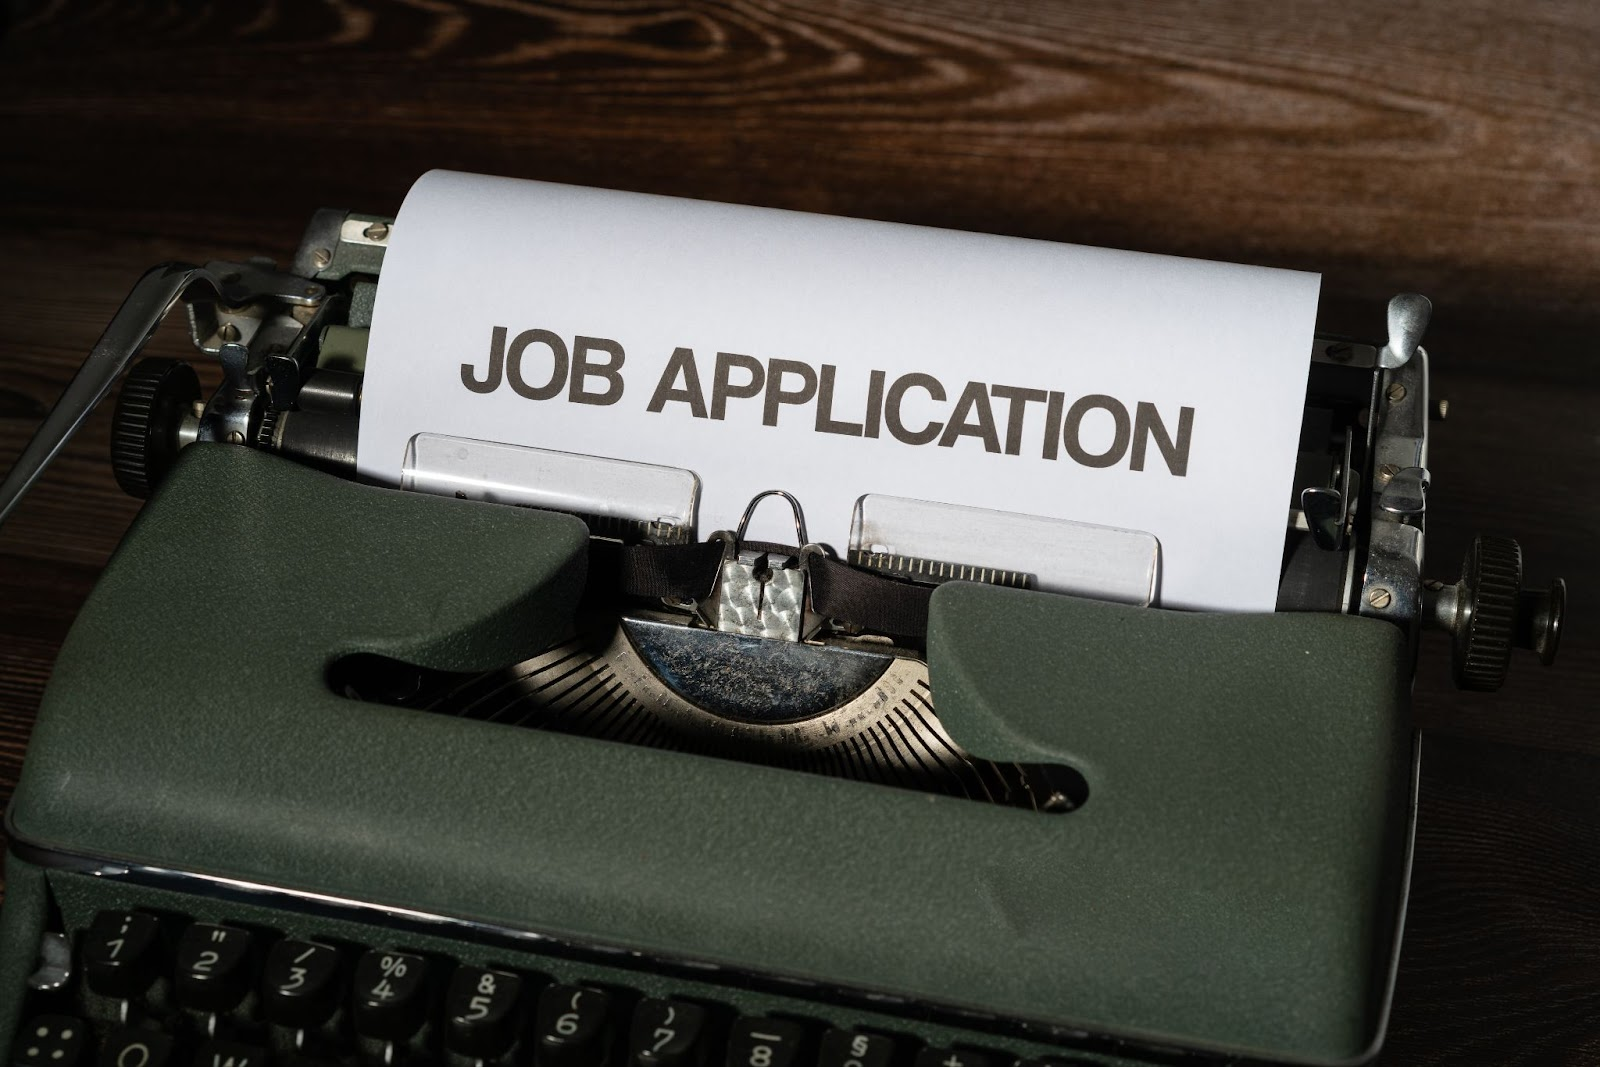 Type writer with the words "Job Application" on the paper